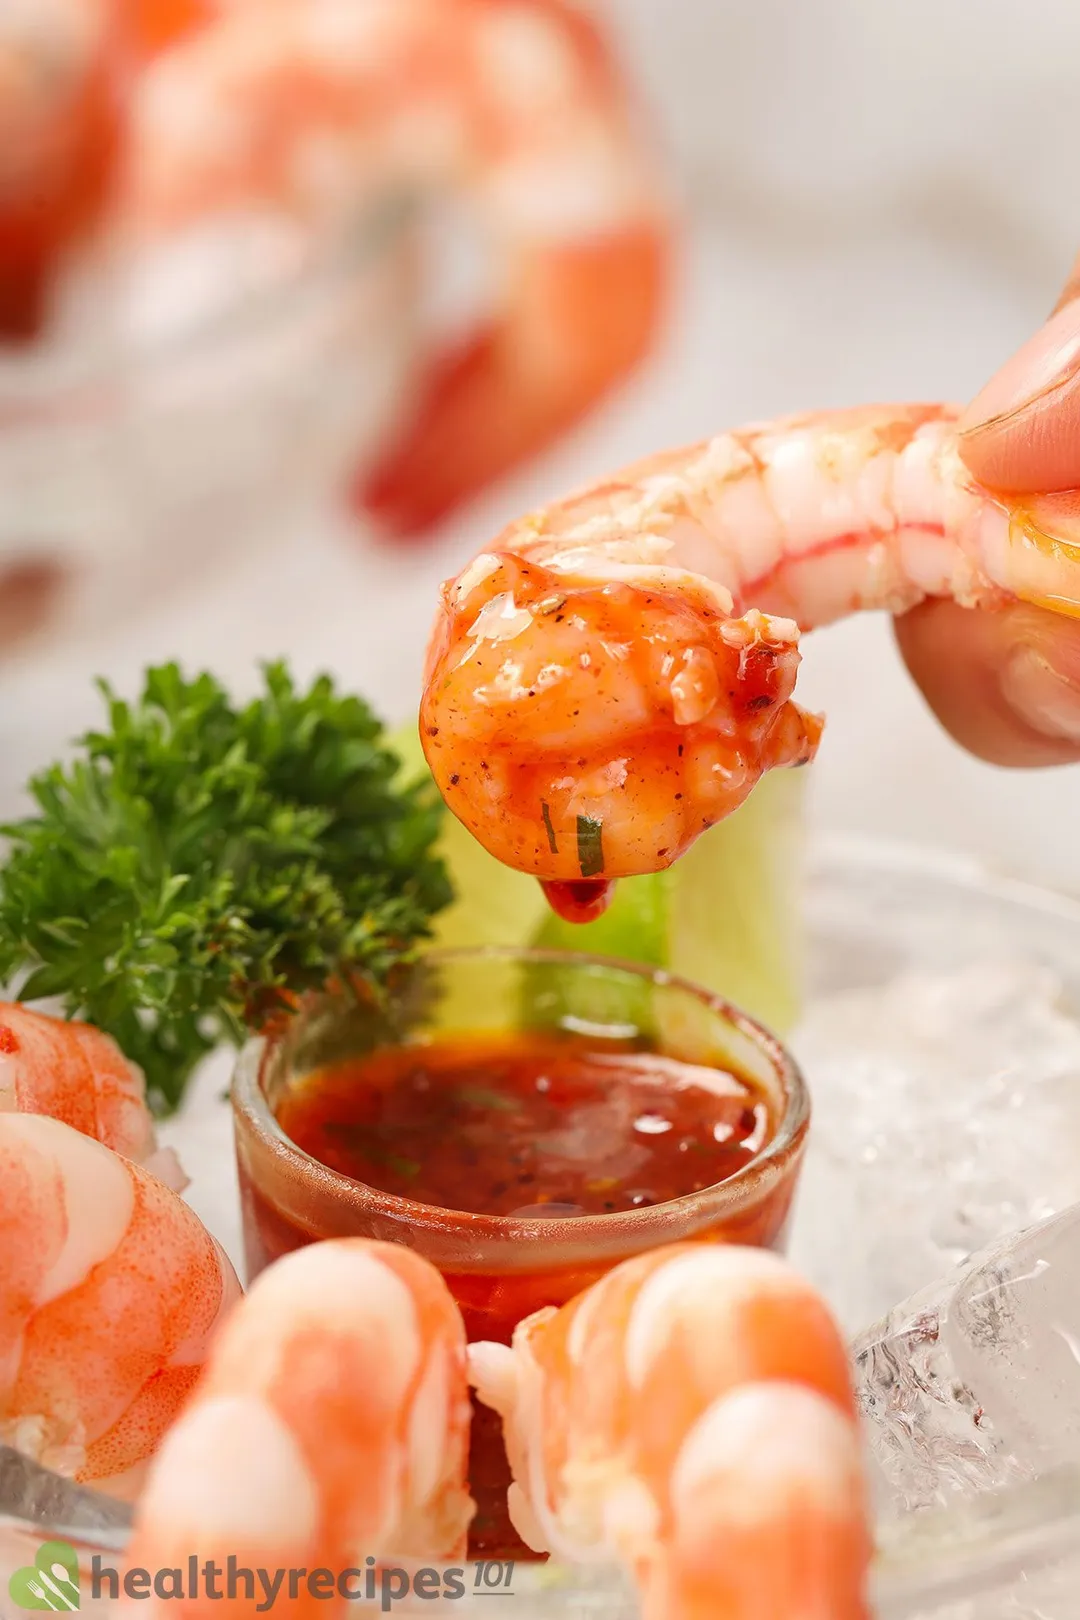 Is Shrimp Cocktail Healthy